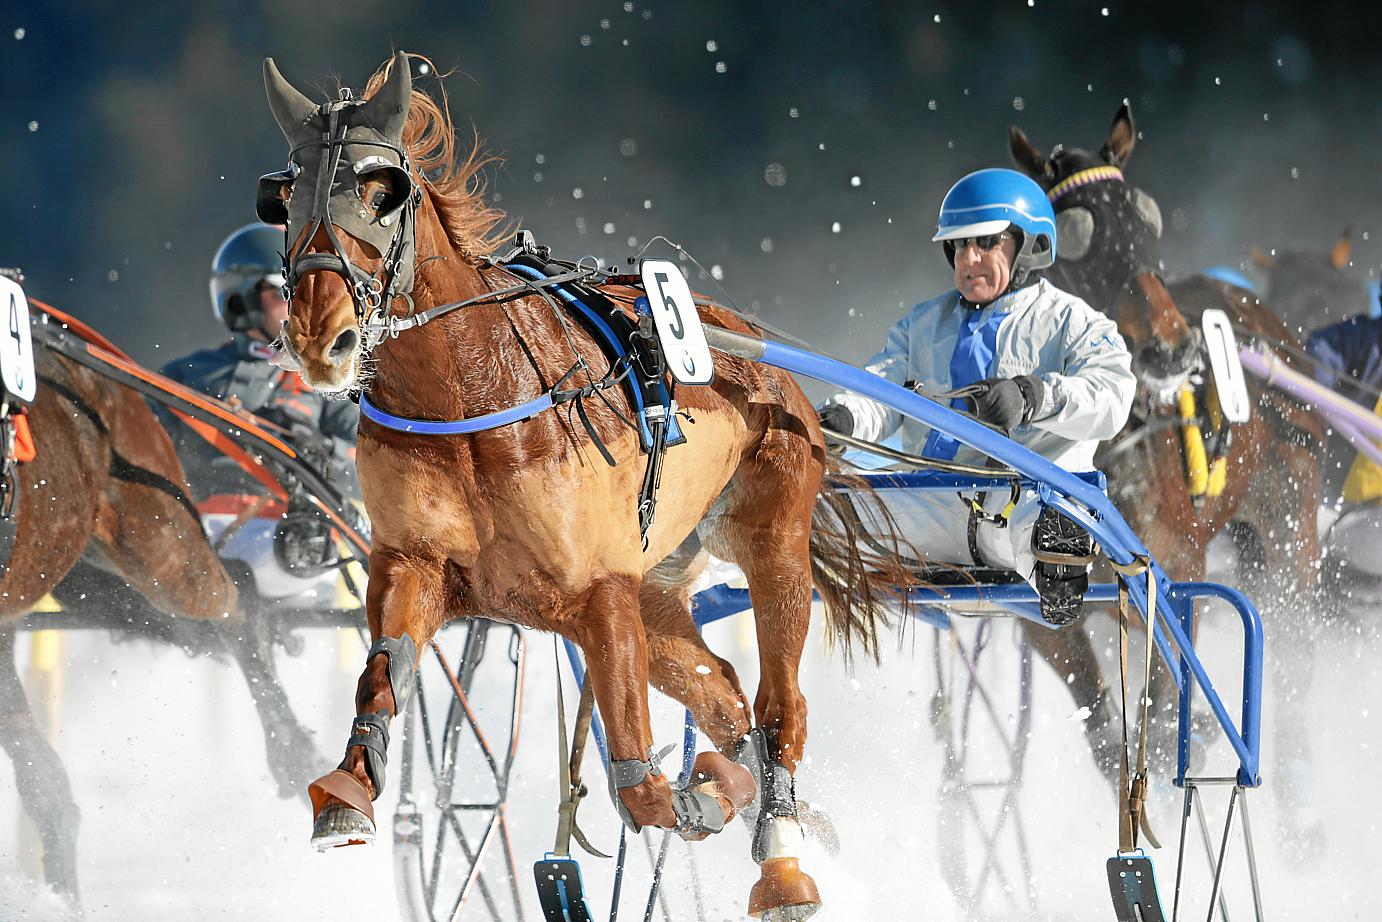  The Trotting Race is a fixed feature during the competition.        swiss-image.ch/Photo Andy Mettler